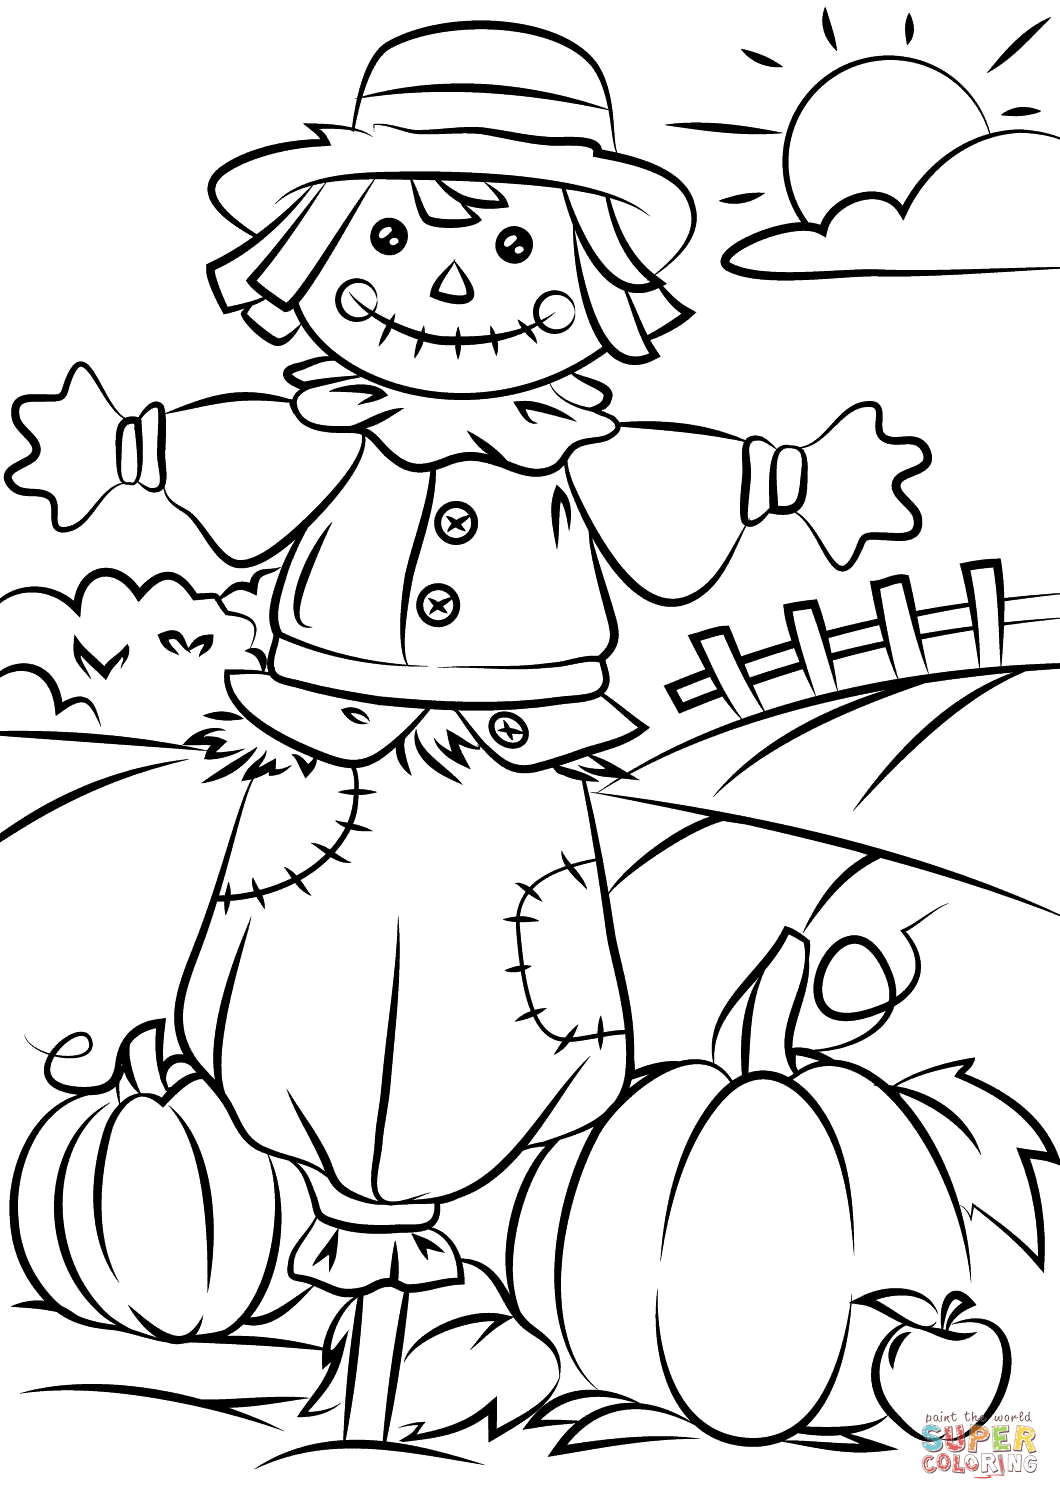 Autumn Scene With Scarecrow Coloring Page | Free Printable Coloring - Free Printable Fall Coloring Pages